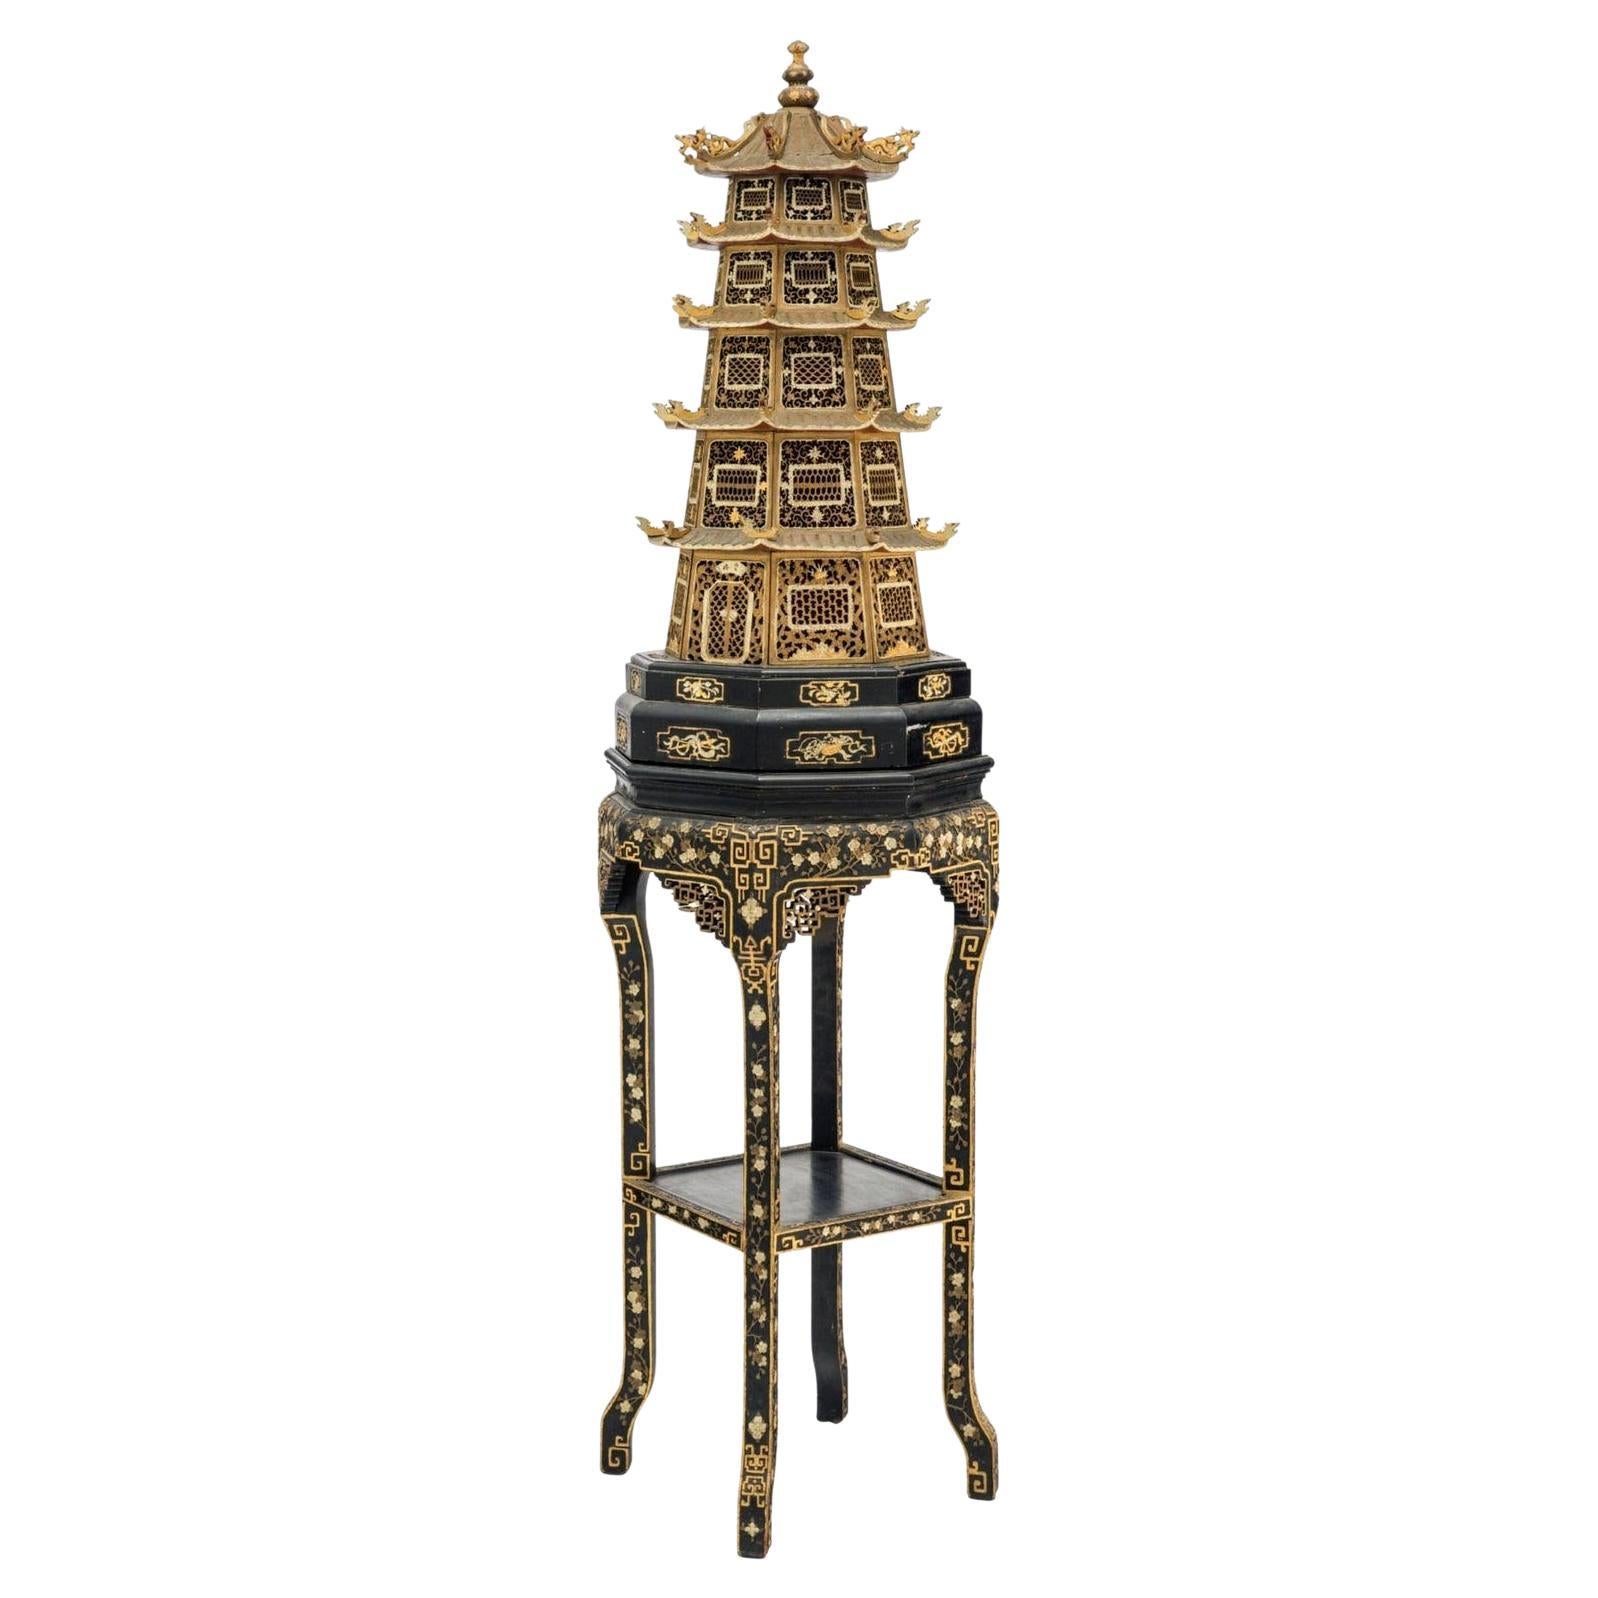 Rare Antique Chinese Sculptural Pagoda On Stand Fashioned As A Floor Lamp For Sale